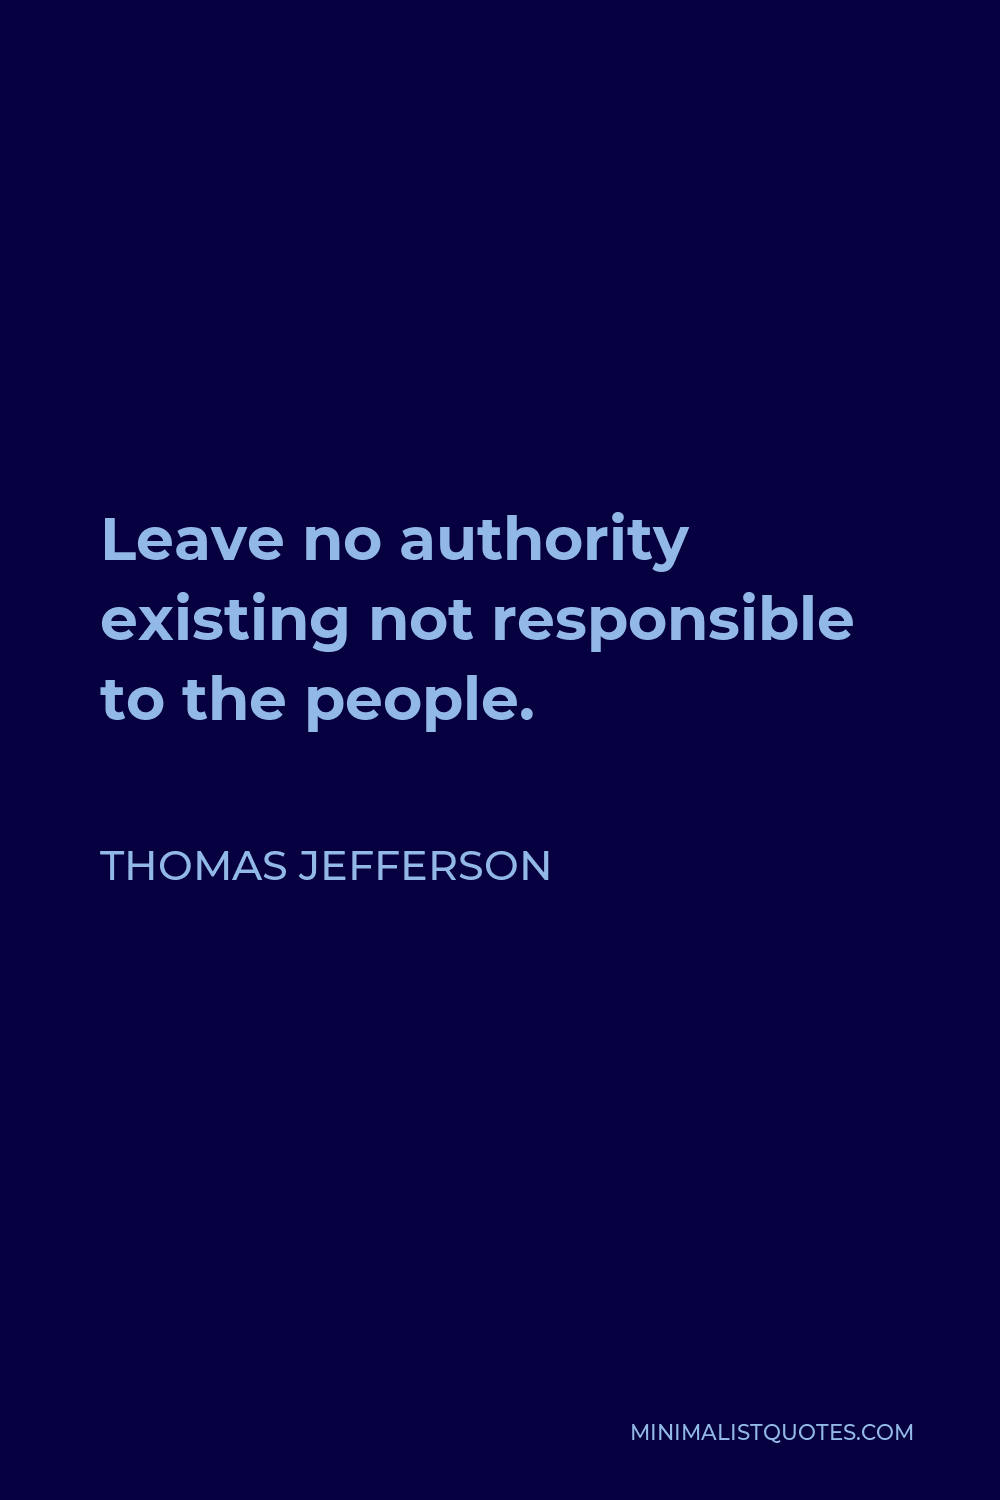 Thomas Jefferson Quote - Leave no authority existing not responsible to the people.